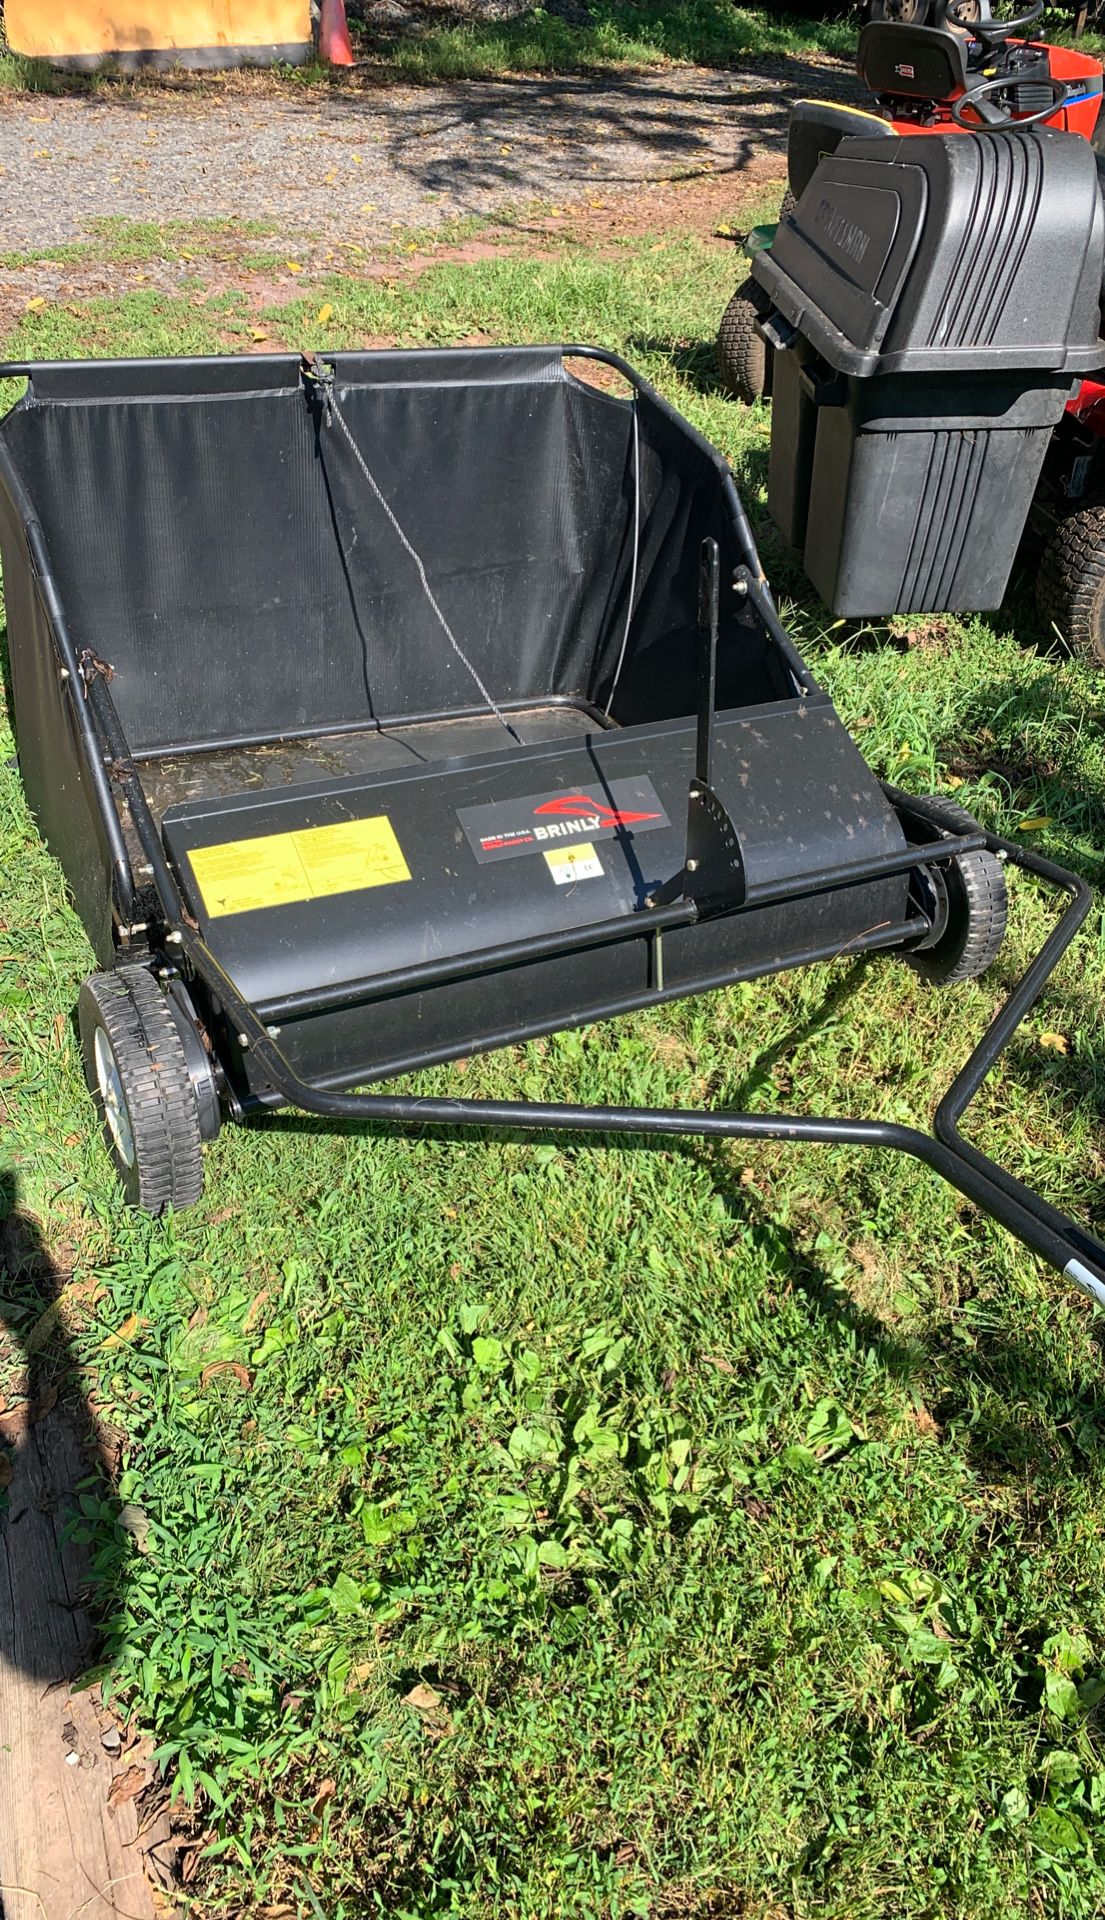 Brinly lawn sweeper